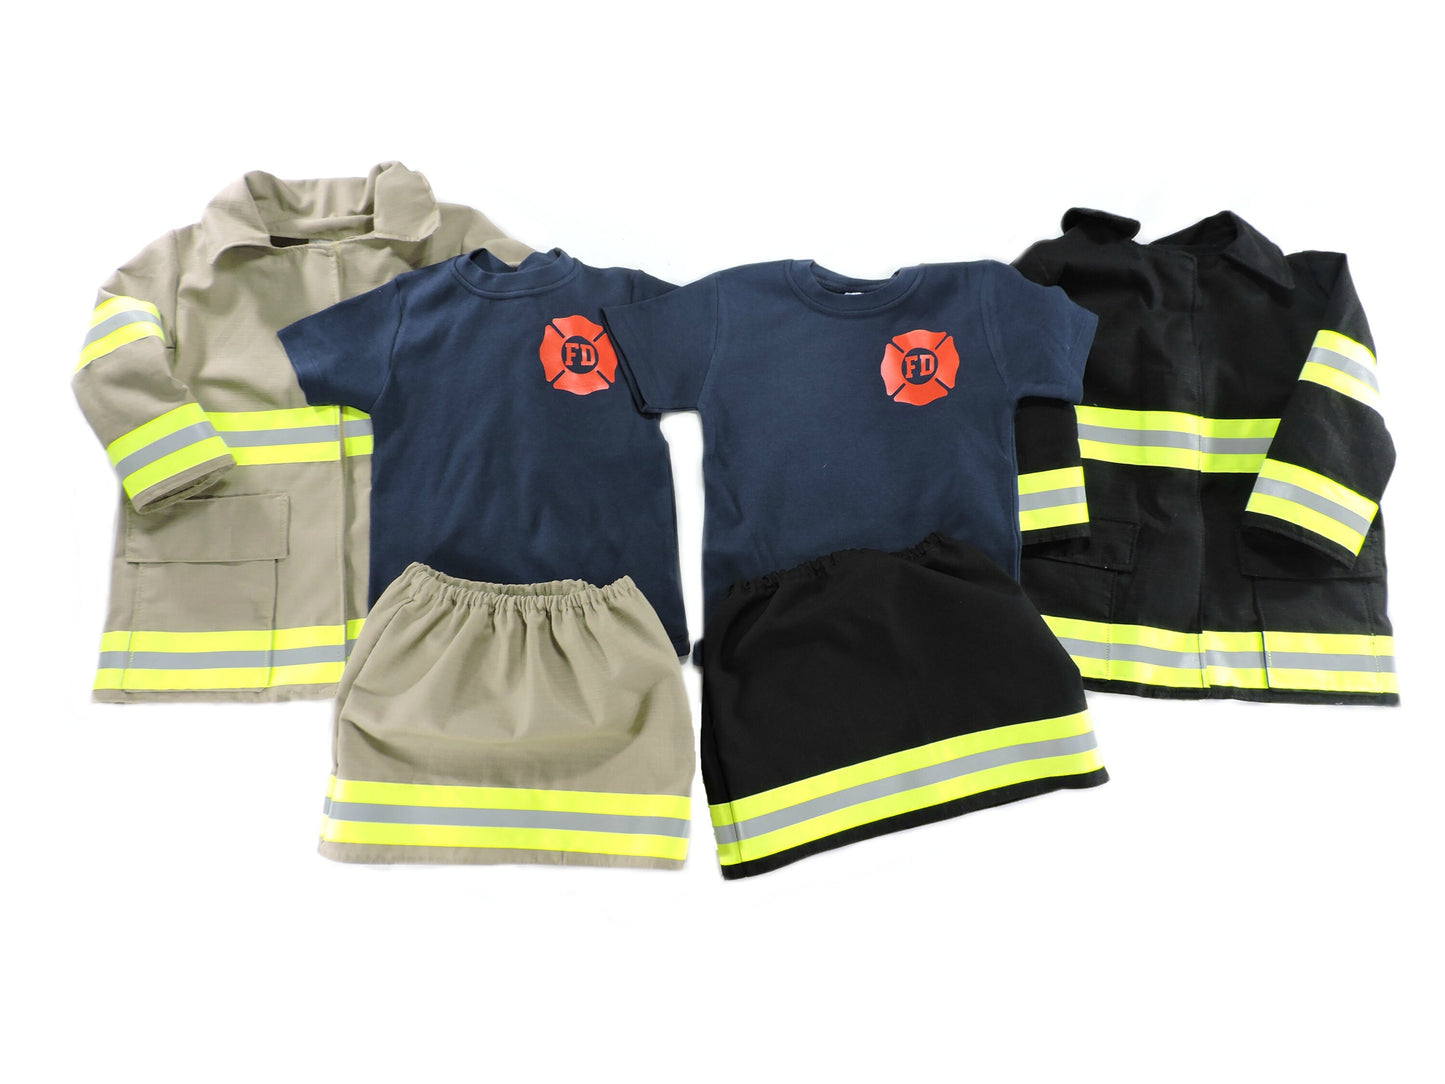 Firefighter toddler girl outfit and jacket